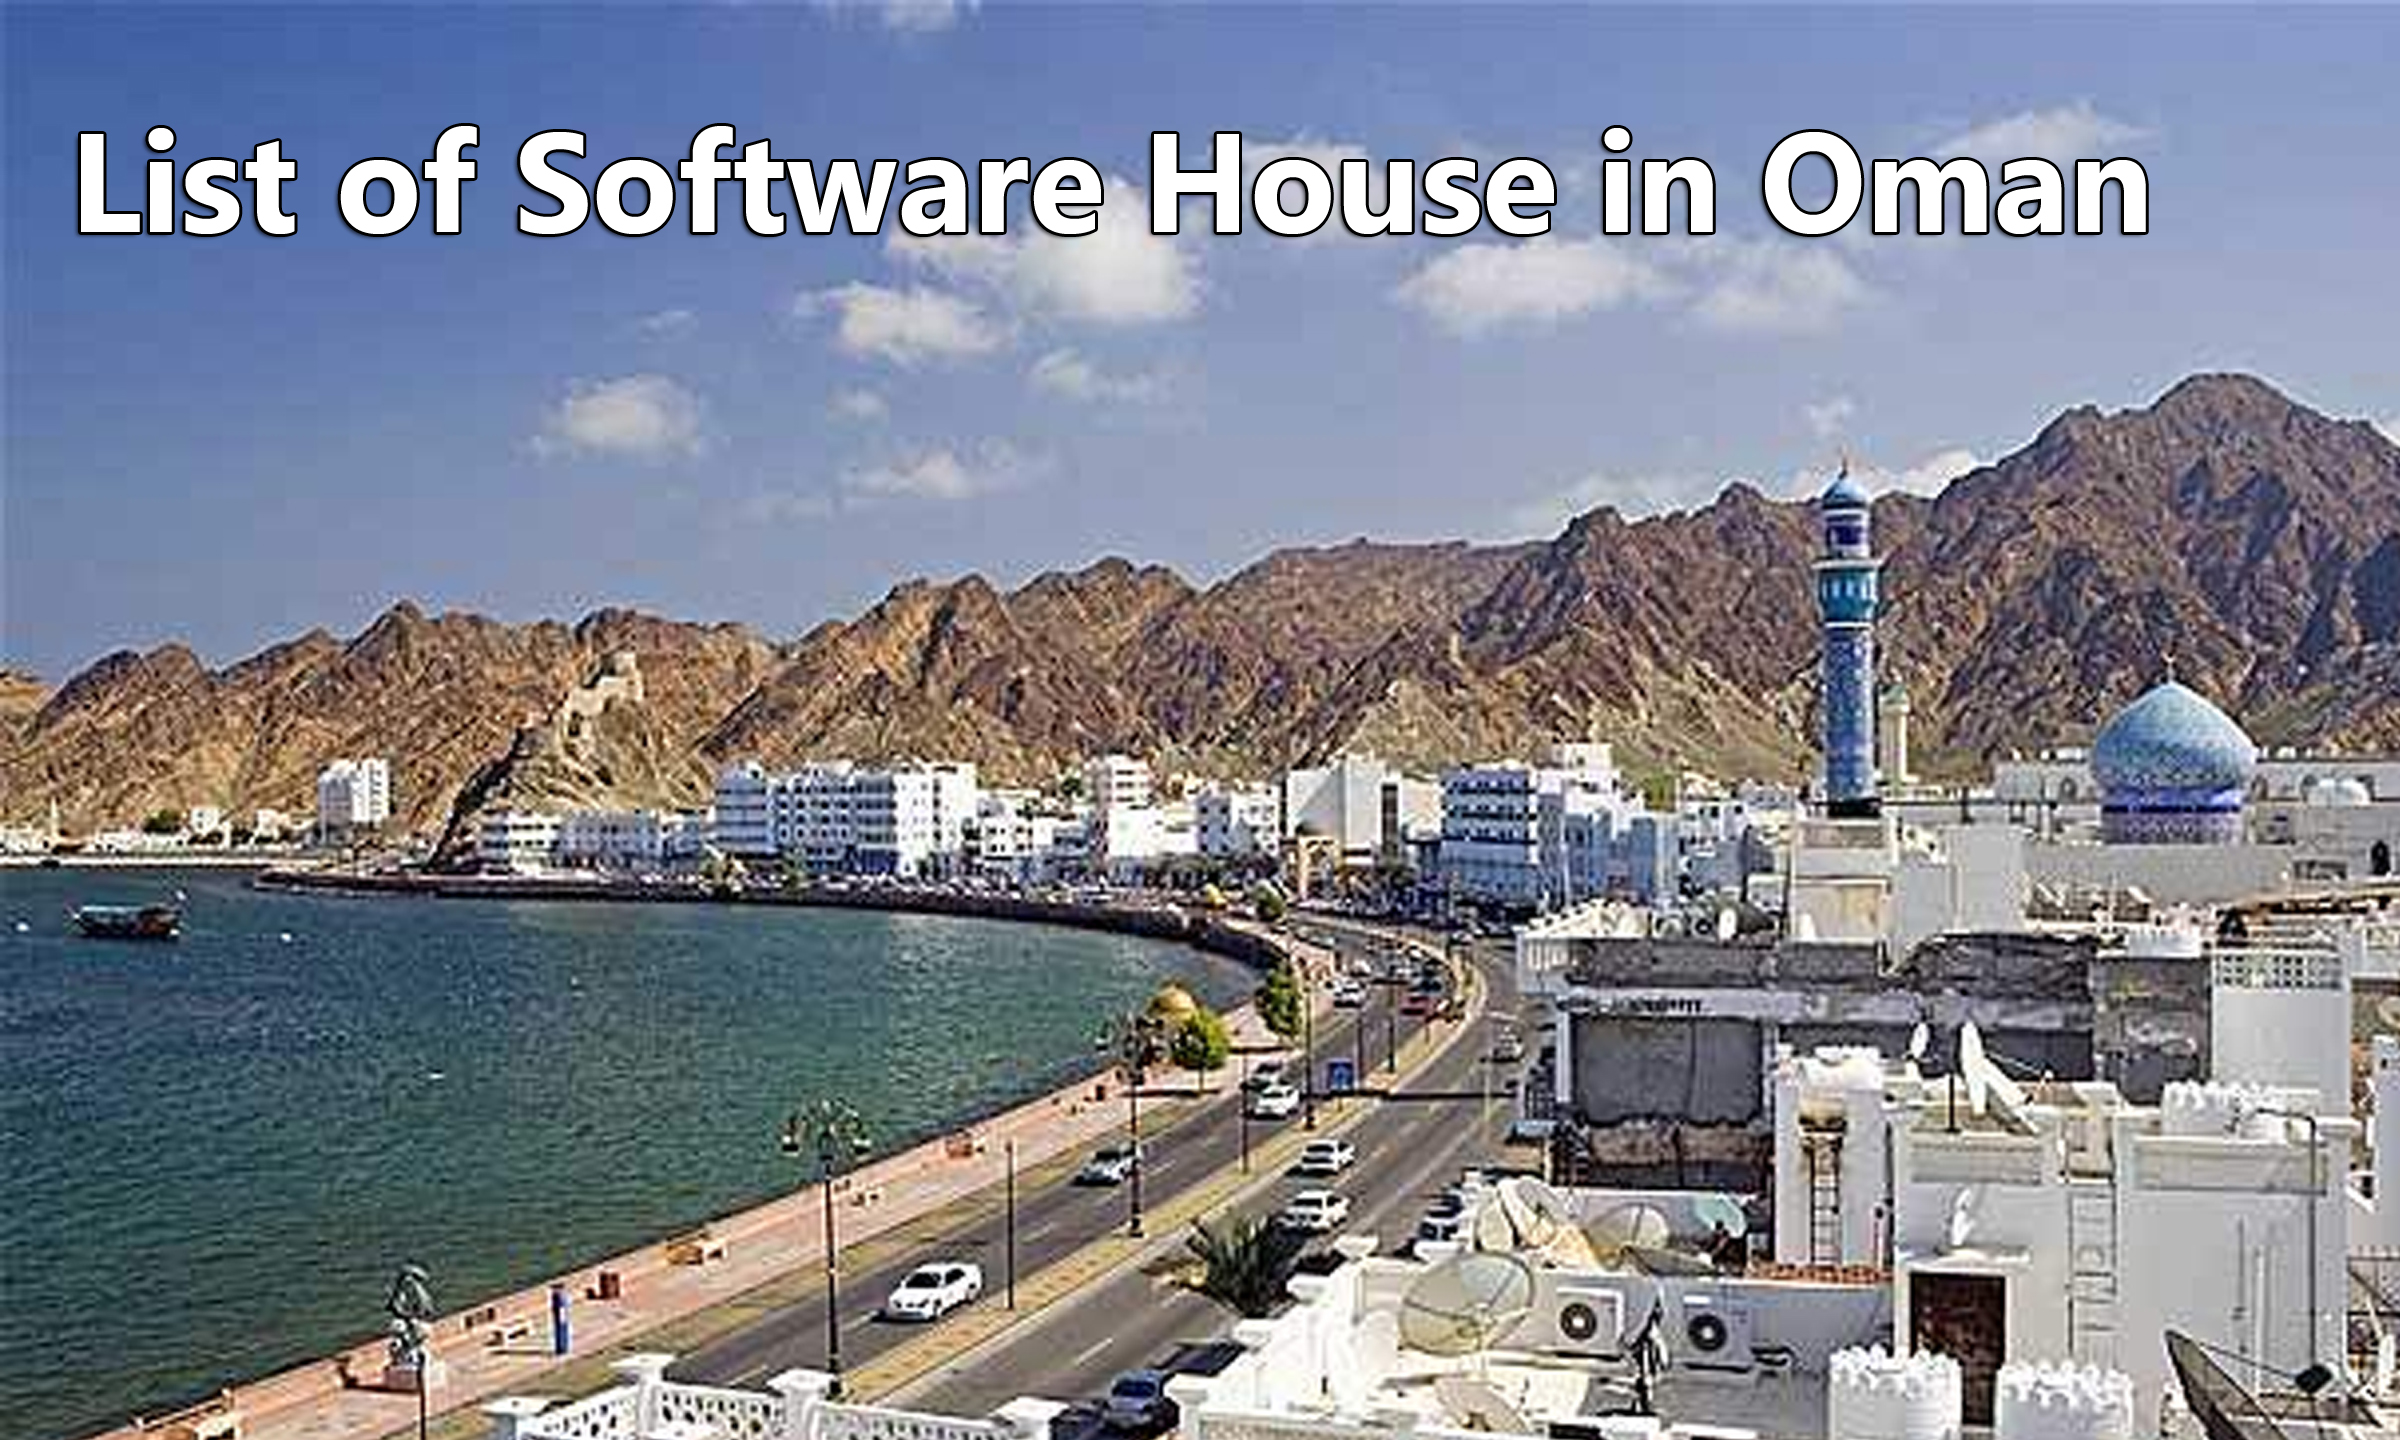 Software house in Oman